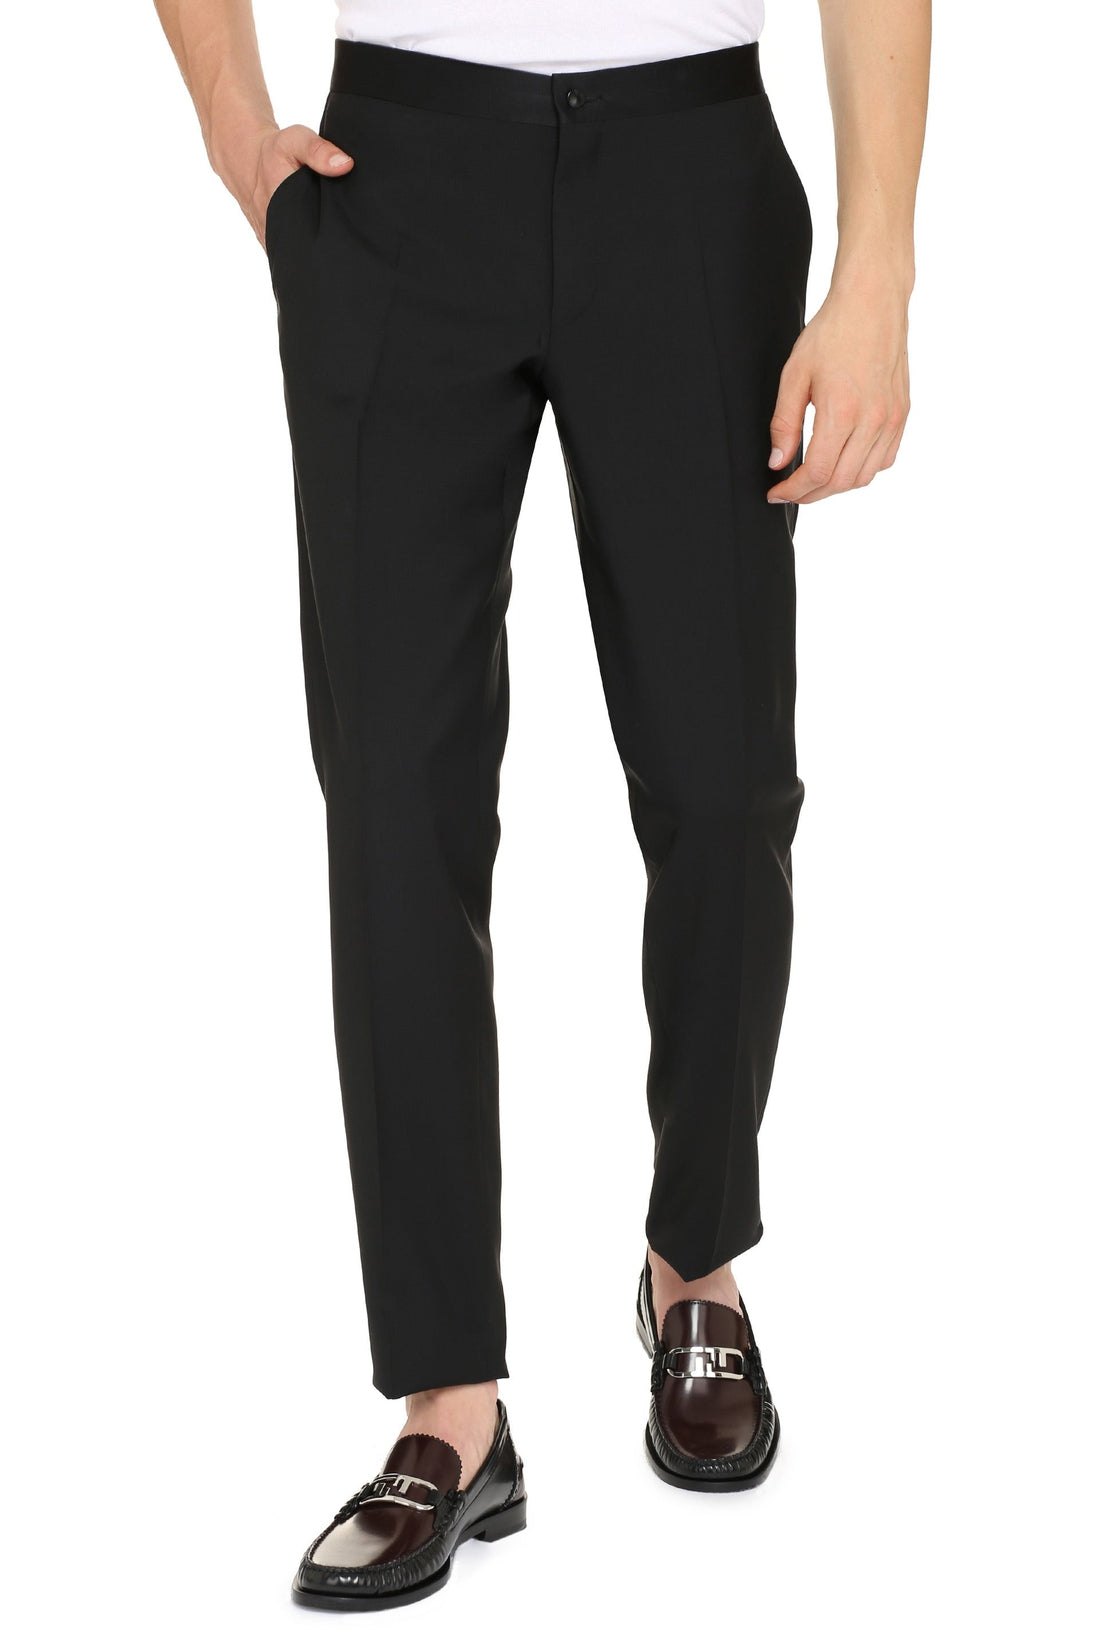 Canali-OUTLET-SALE-Wool blend tailored trousers-ARCHIVIST